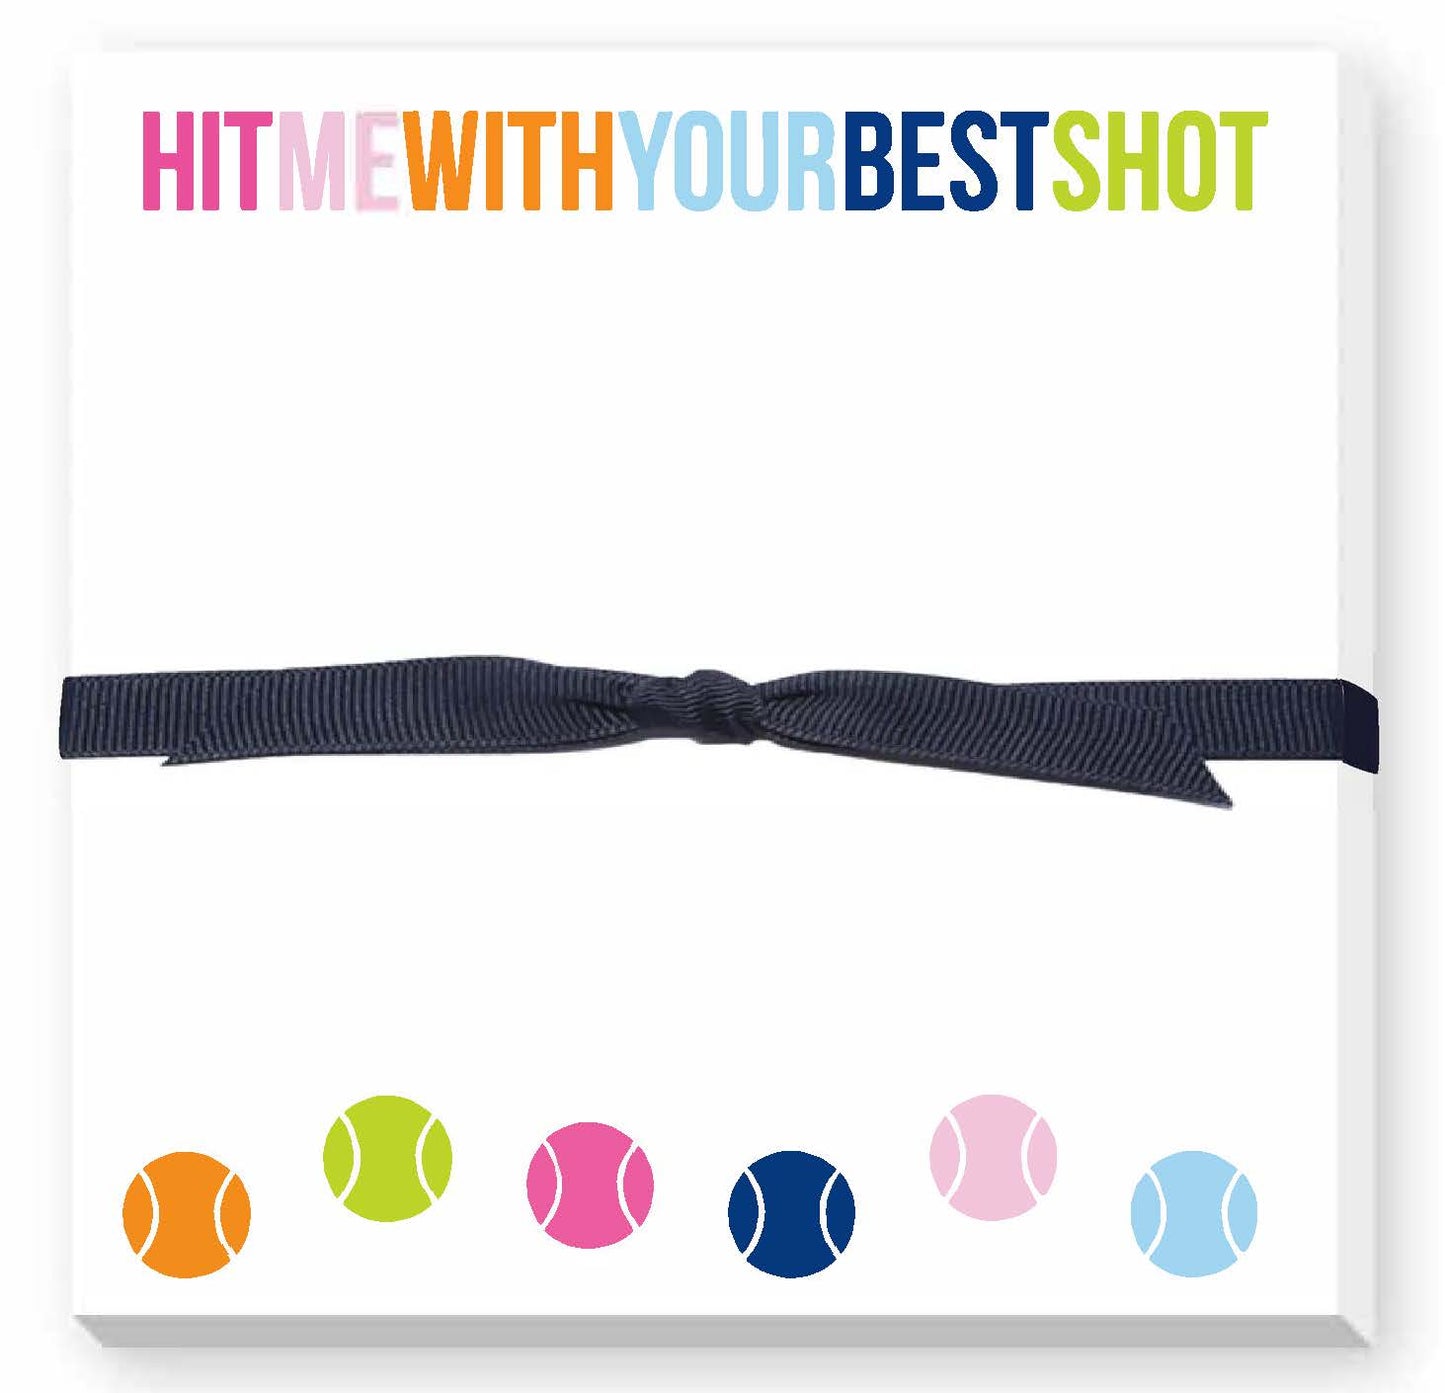 5.5"x5.5" paper notepad with multicolor slogan "Hit Me With Your Best Shot" and Bouncing tennis balls, bound with black grosgrain ribbon